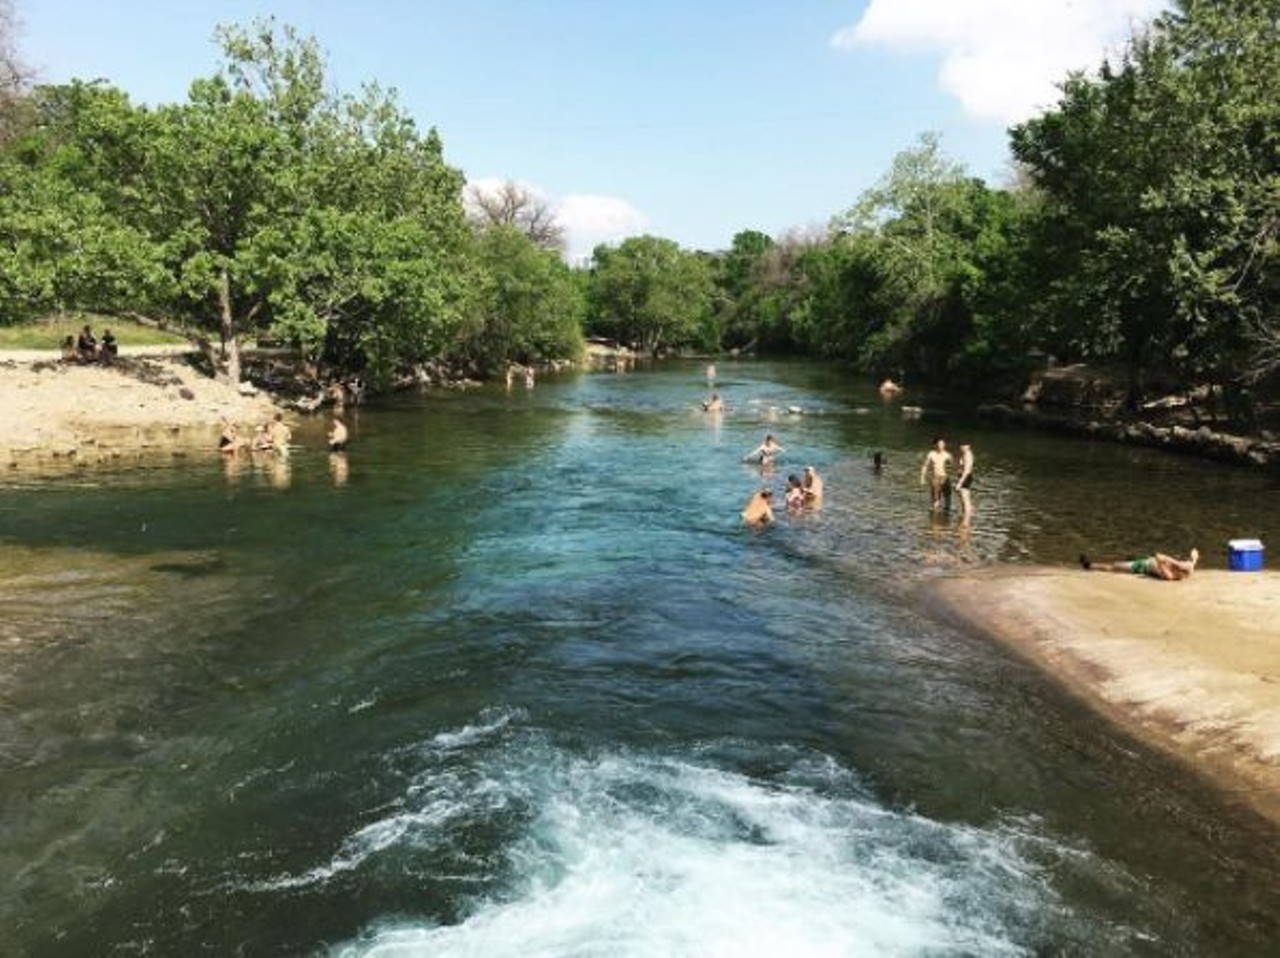 Barton Springs
2201 Barton Springs Road, Austin, (512) 867-3080, austintexas.gov
Play a few rounds of ultimate frisbee in the nearby Zilker Park, then cool off with a swim.
Photo via Instagram, olivialsilvestri